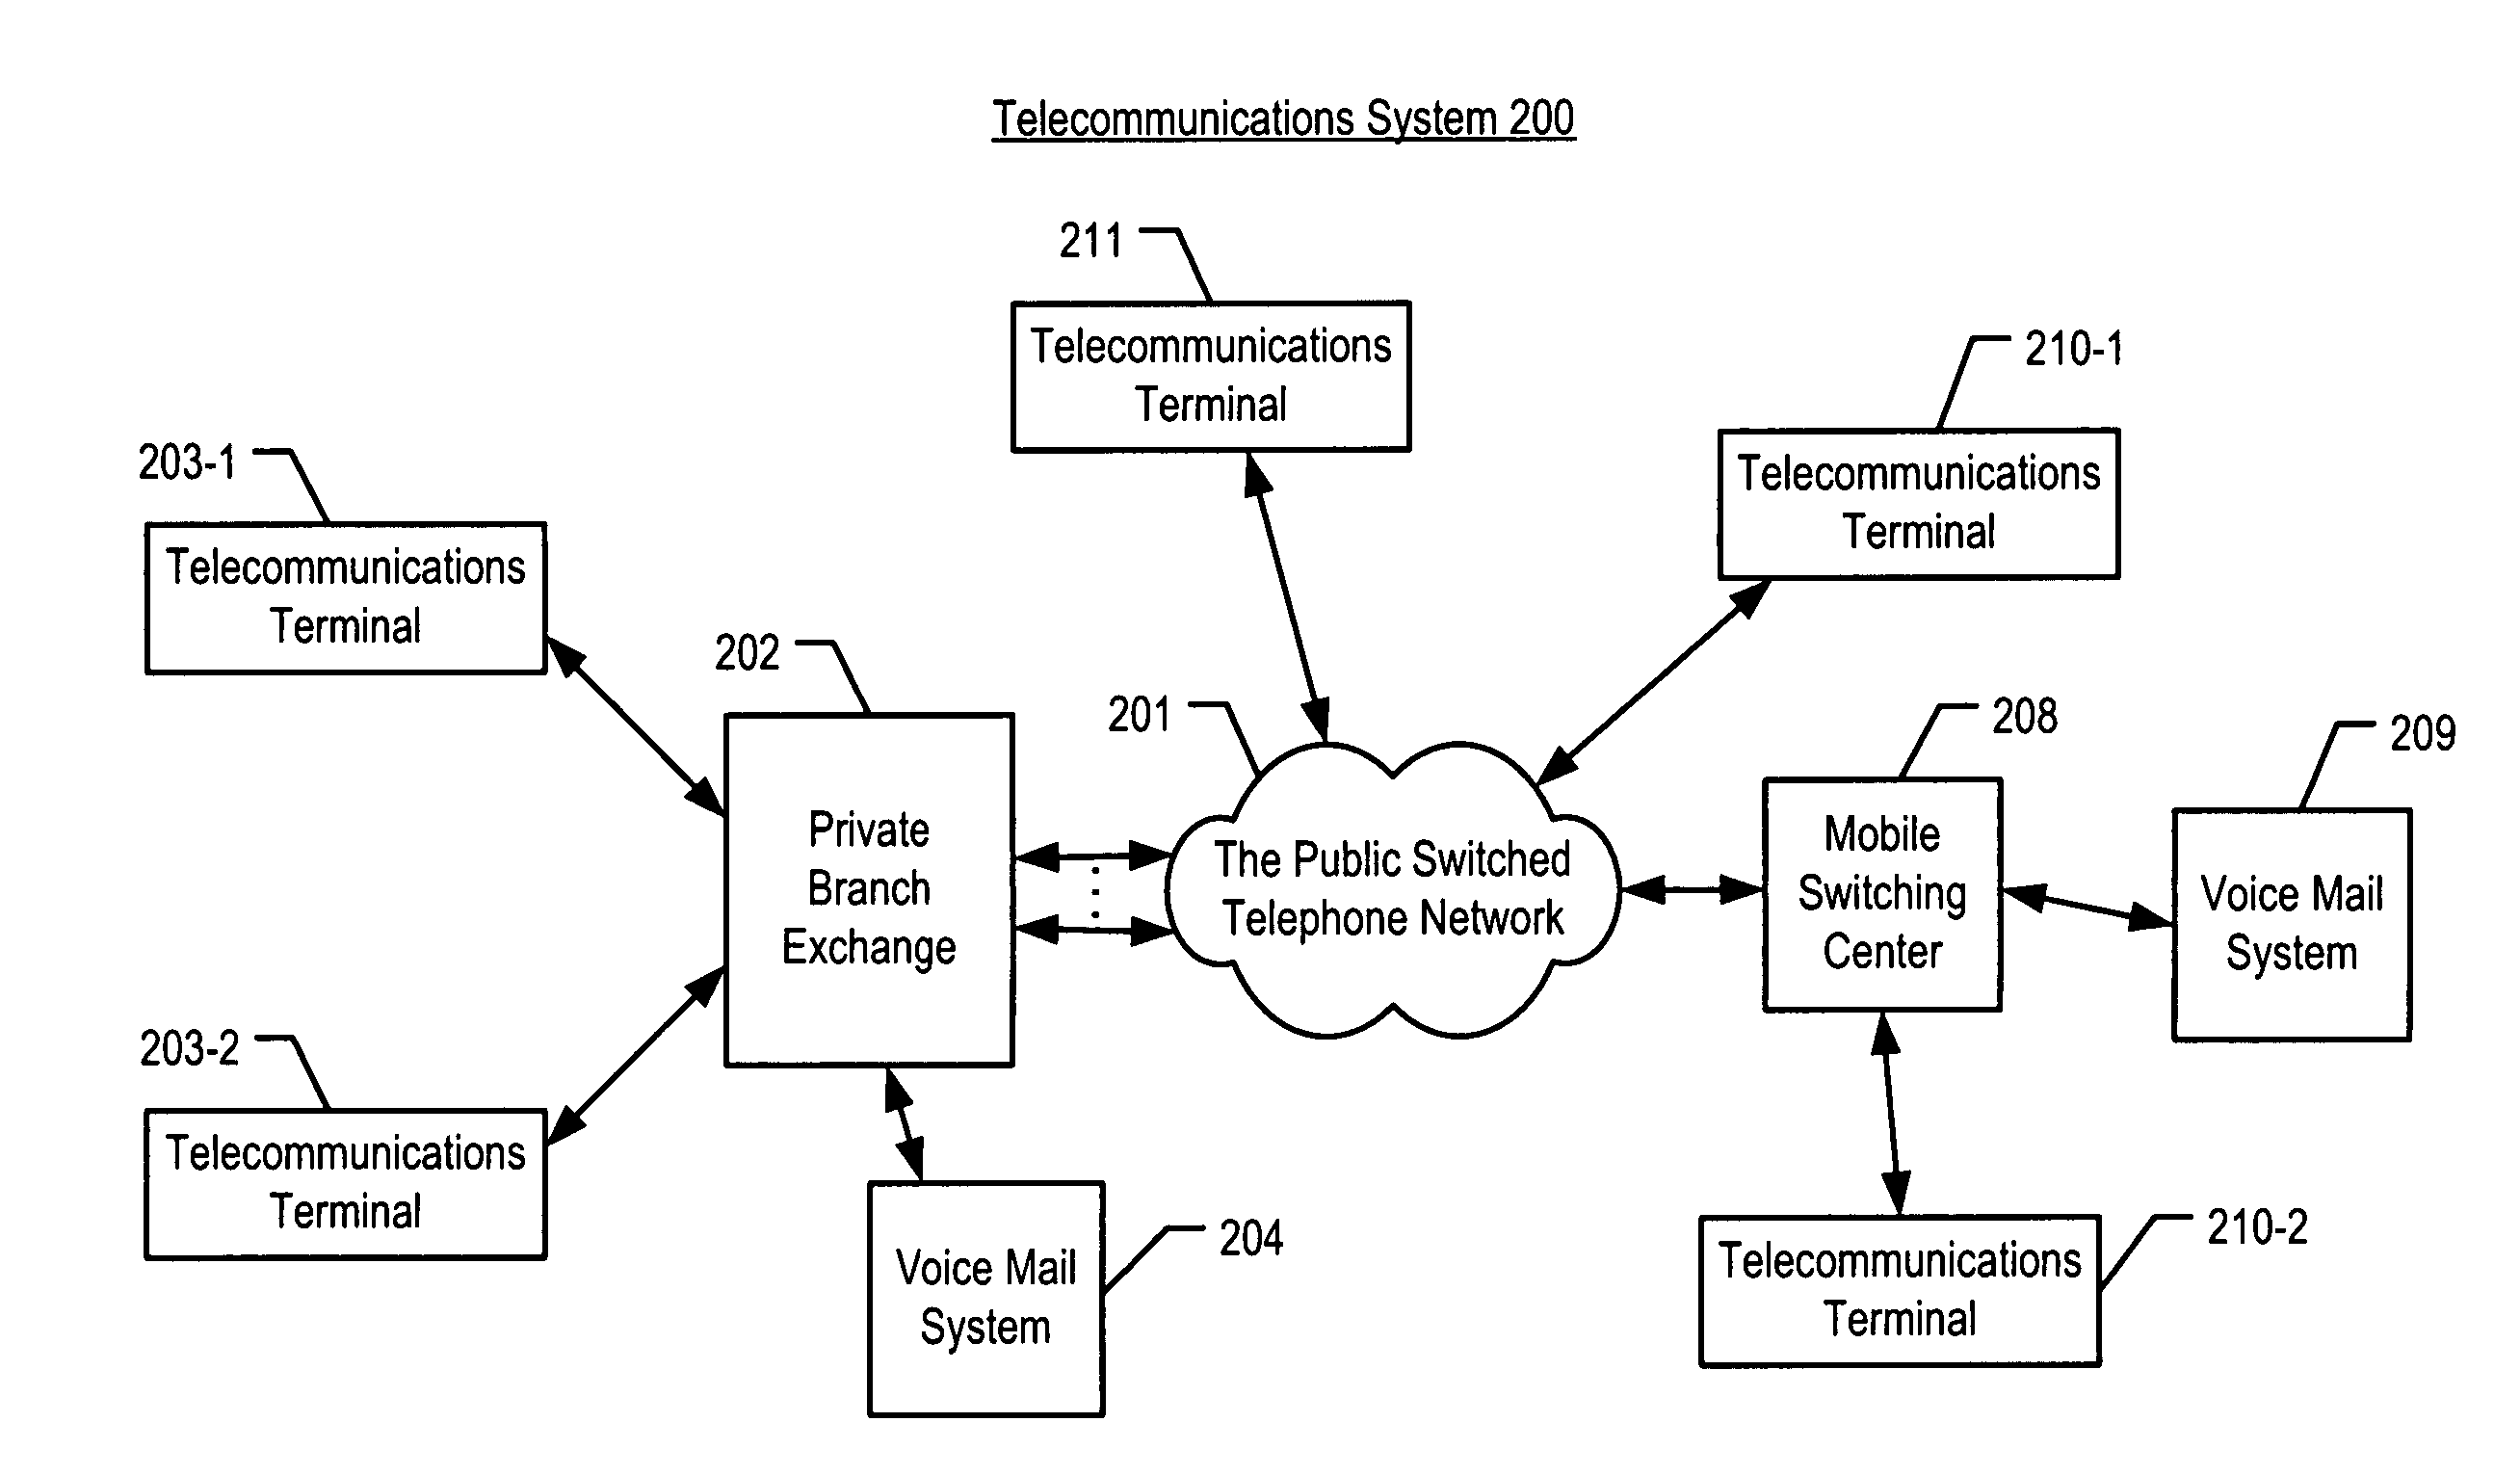 Detecting a voice mail system answering a call